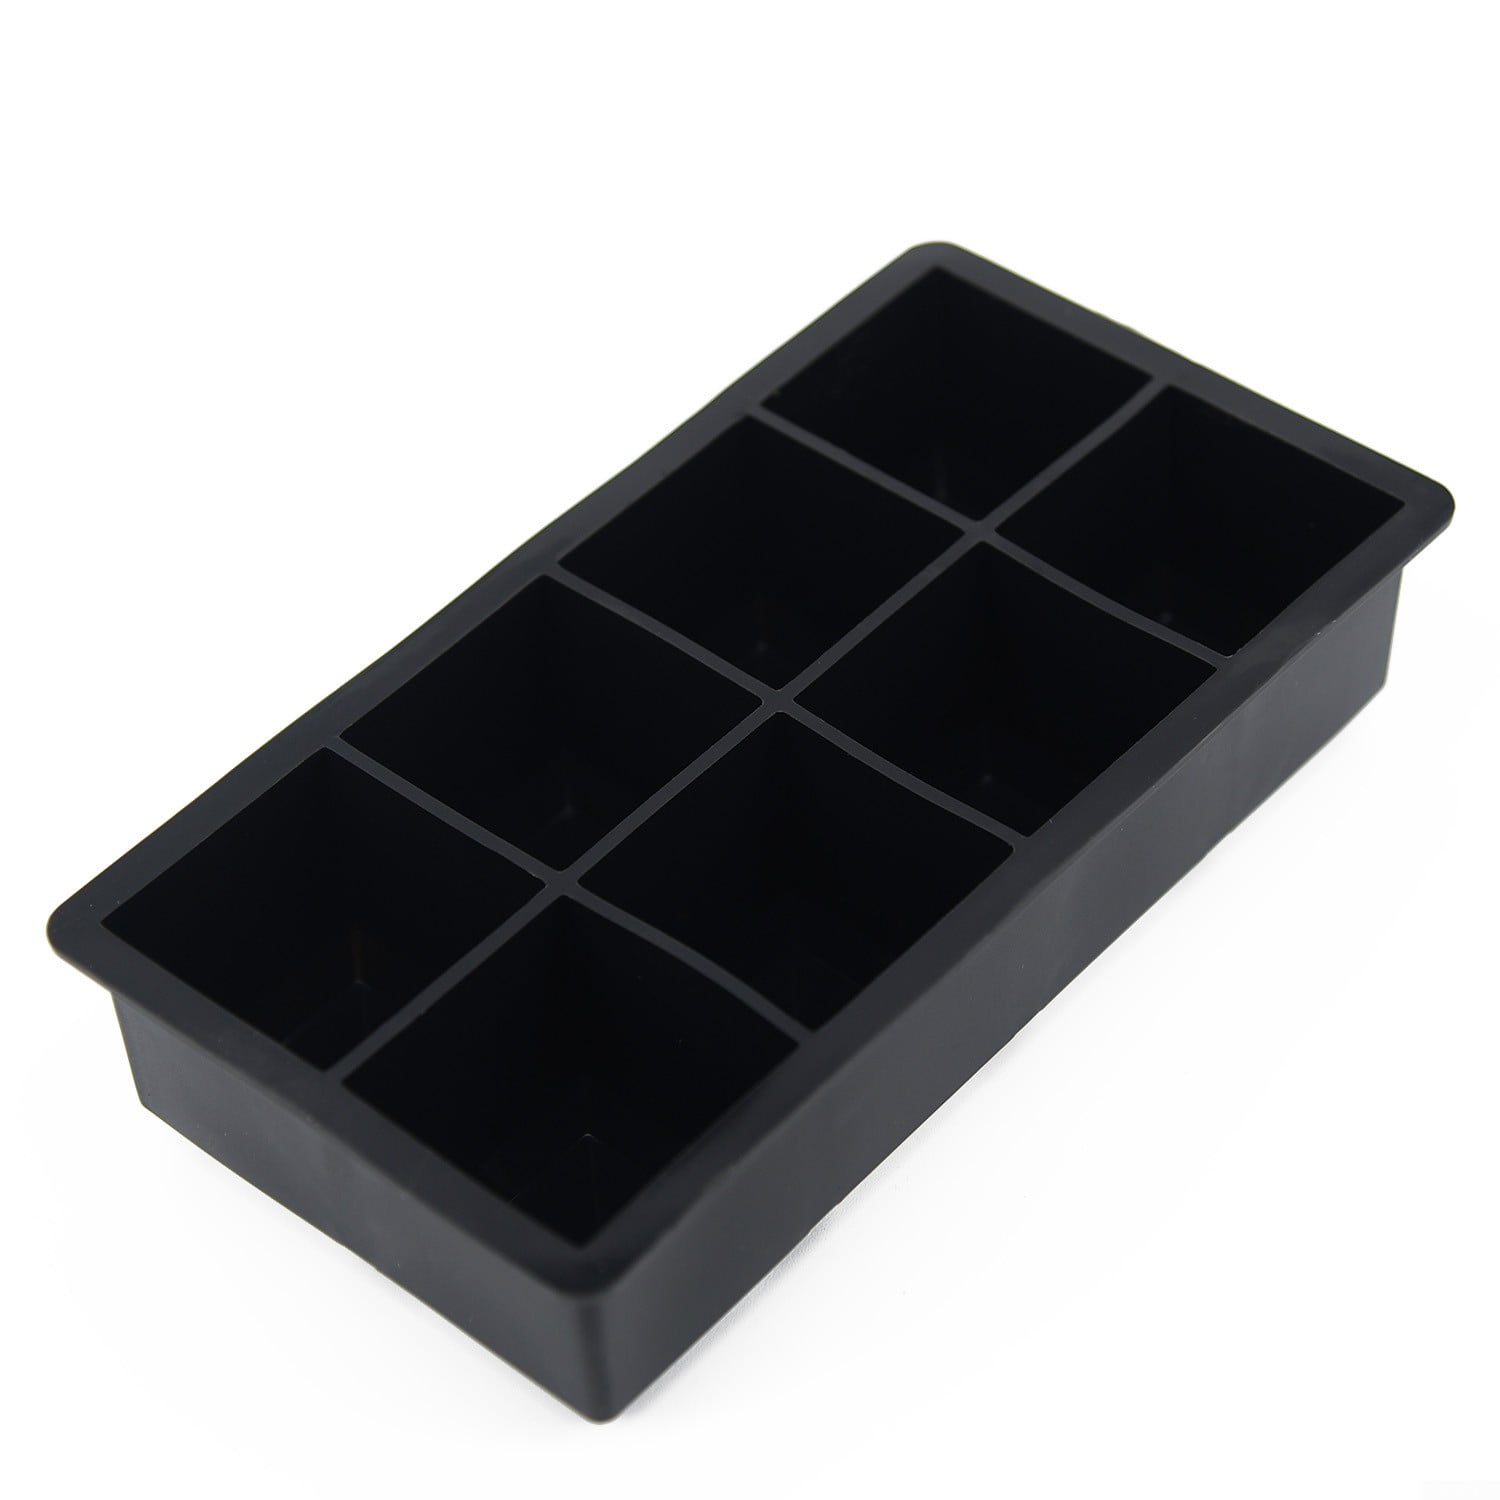 Big Giant Jumbo Large Silicone Ice Cold Cube Freeze Maker Square Tray Mold Mould 